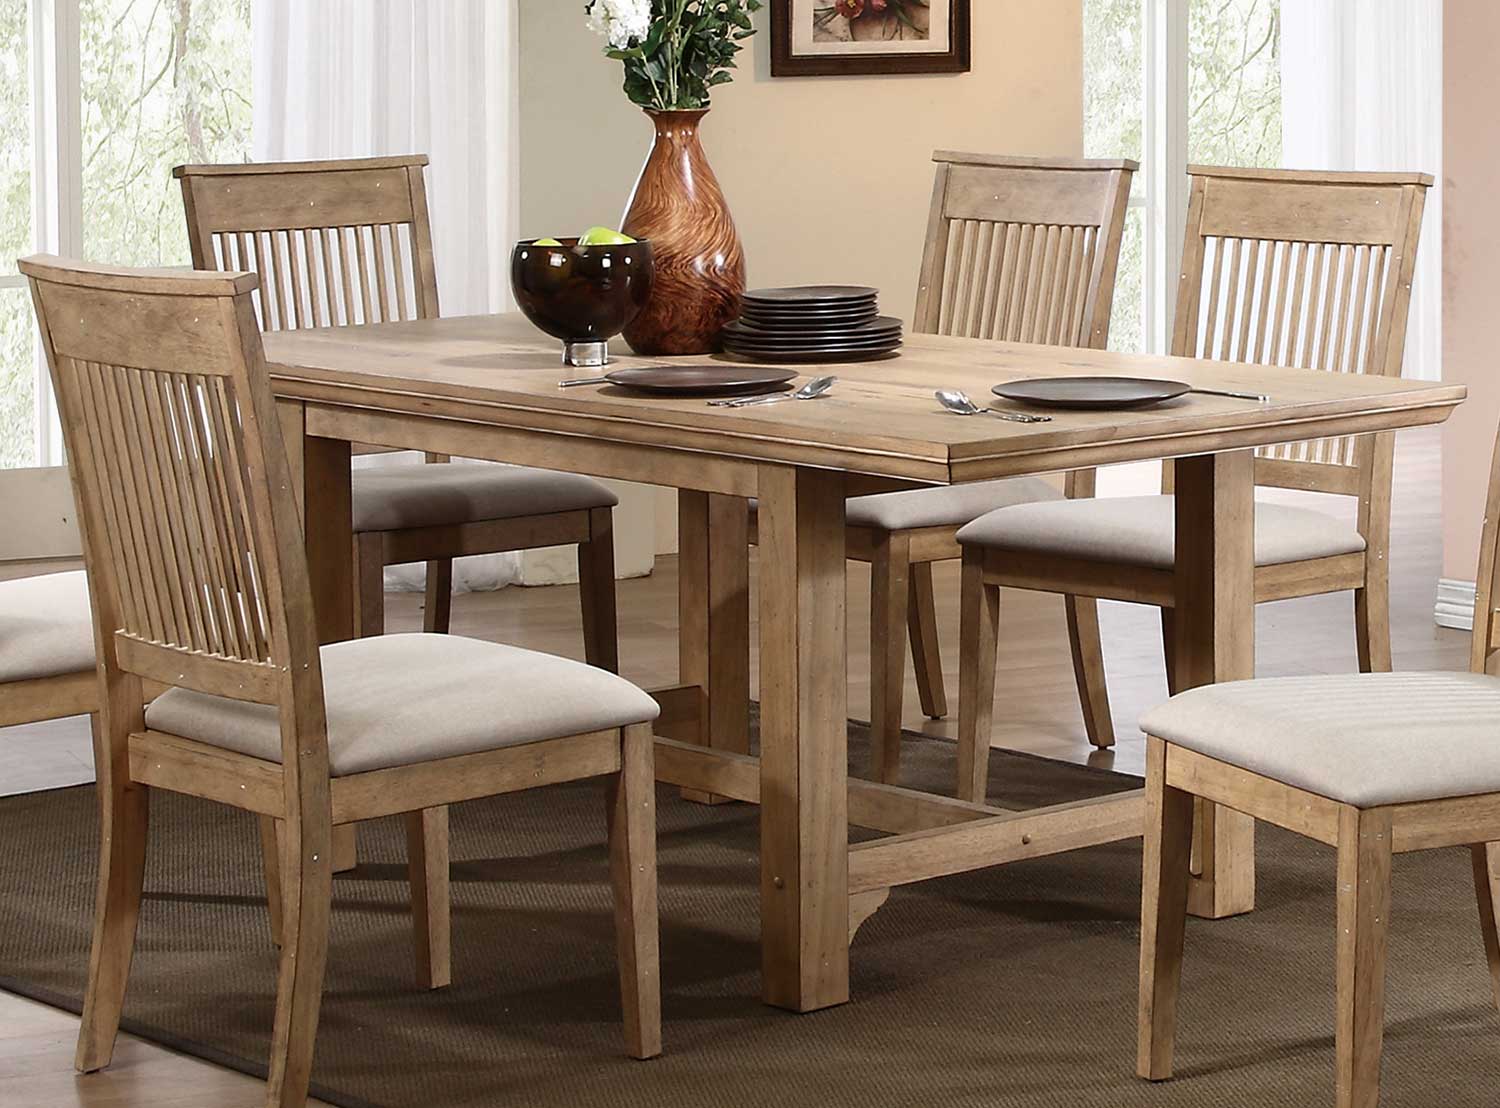 Homelegance Candace Trestle Dining Table - Natural